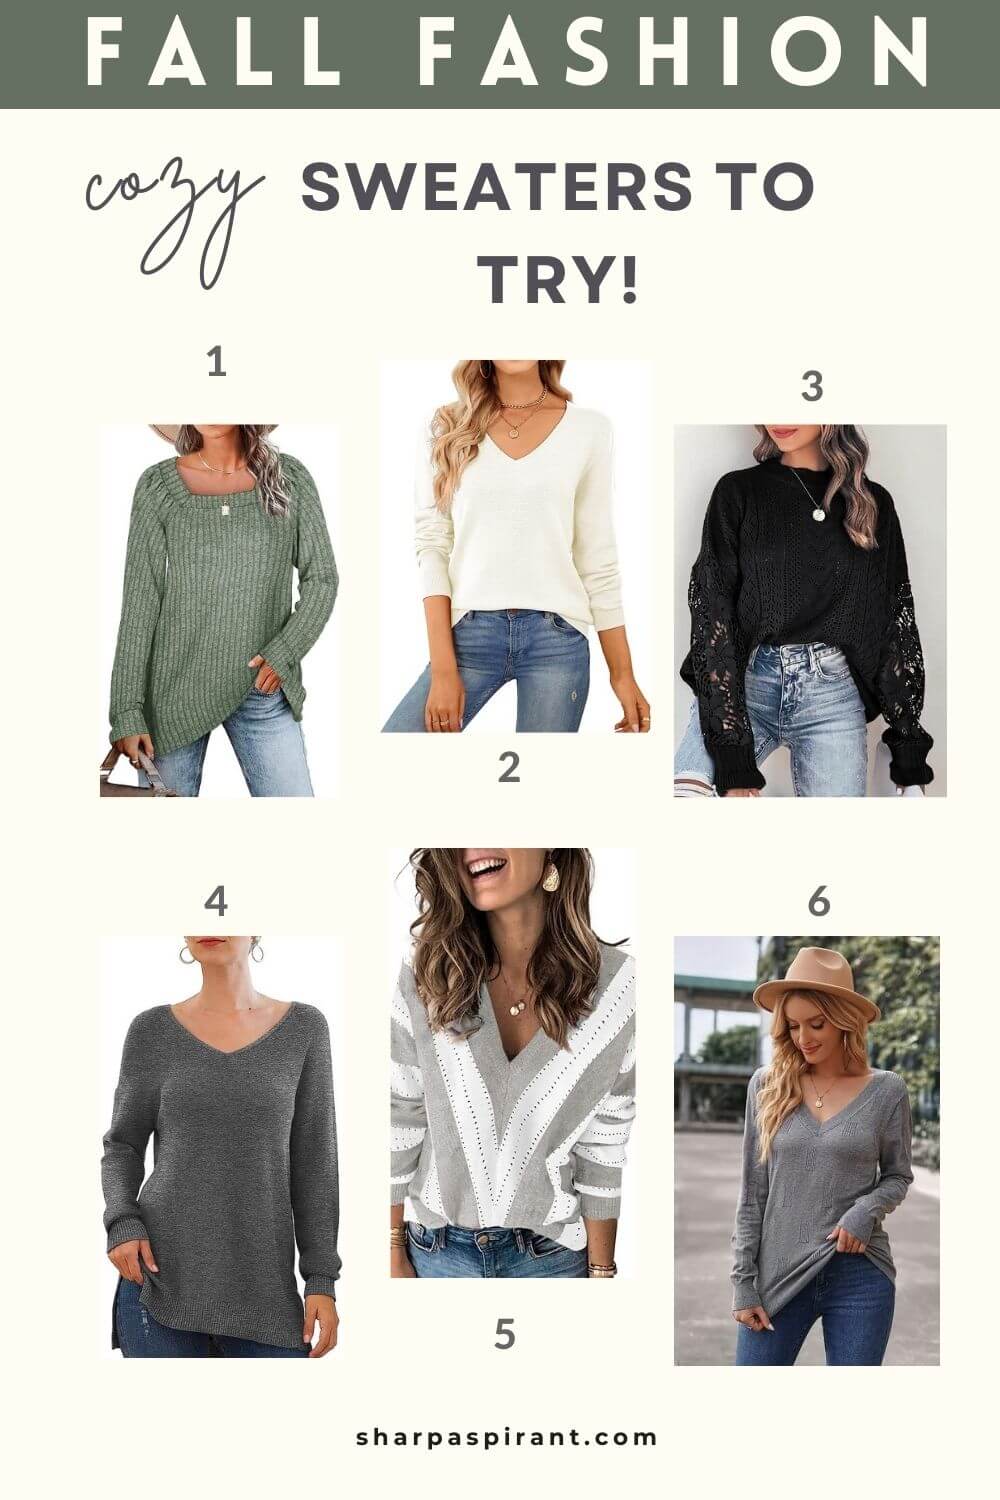 Upgrade your style with these must-have fall fashion essentials for women, including cozy layers, versatile outerwear, & statement accessories!